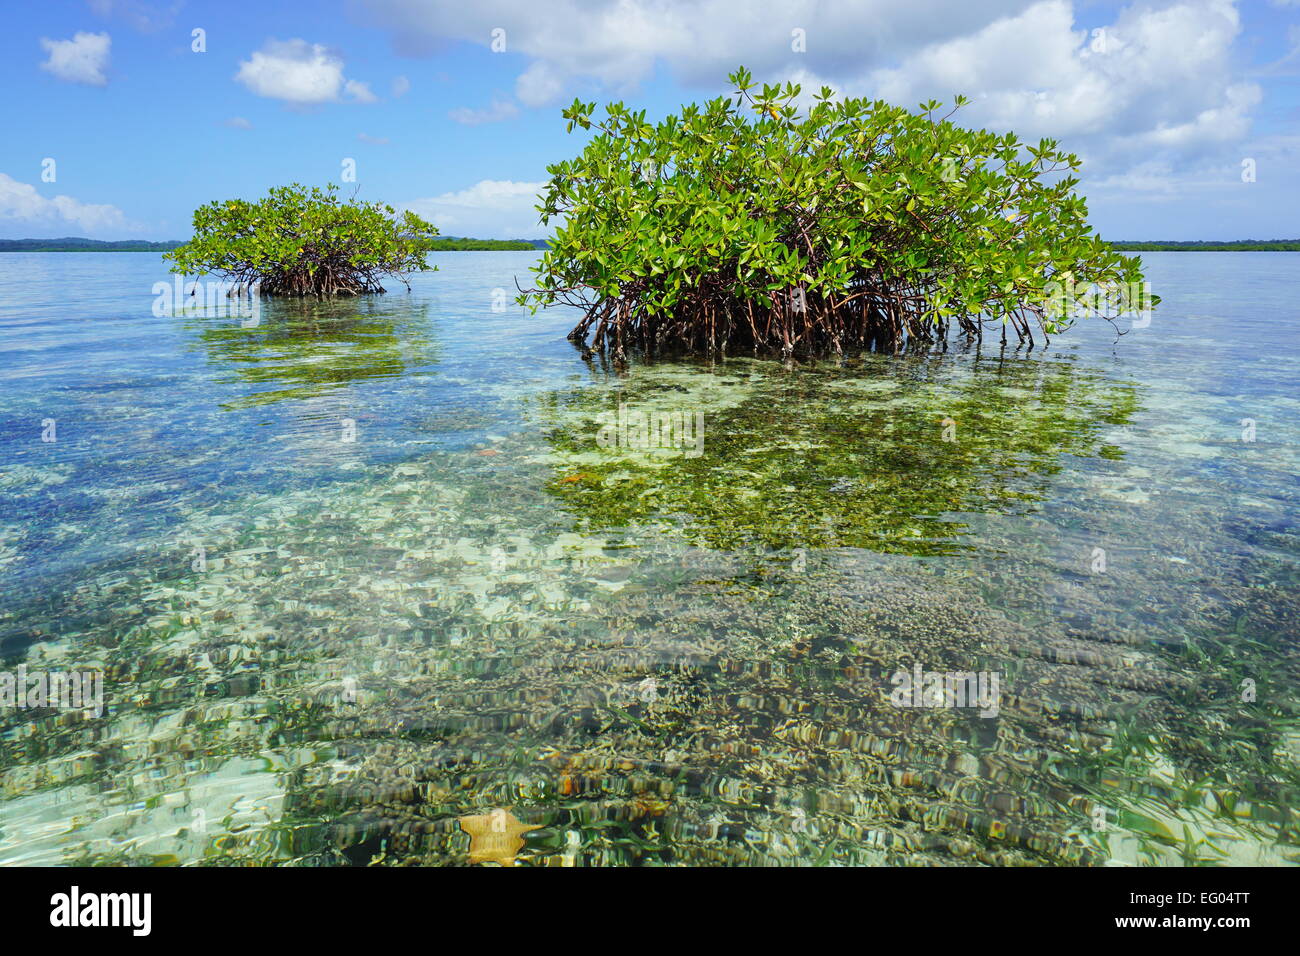 Islets of mangrove in shallow water with corals below sea surface, Caribbean, Panama, Central America Stock Photo